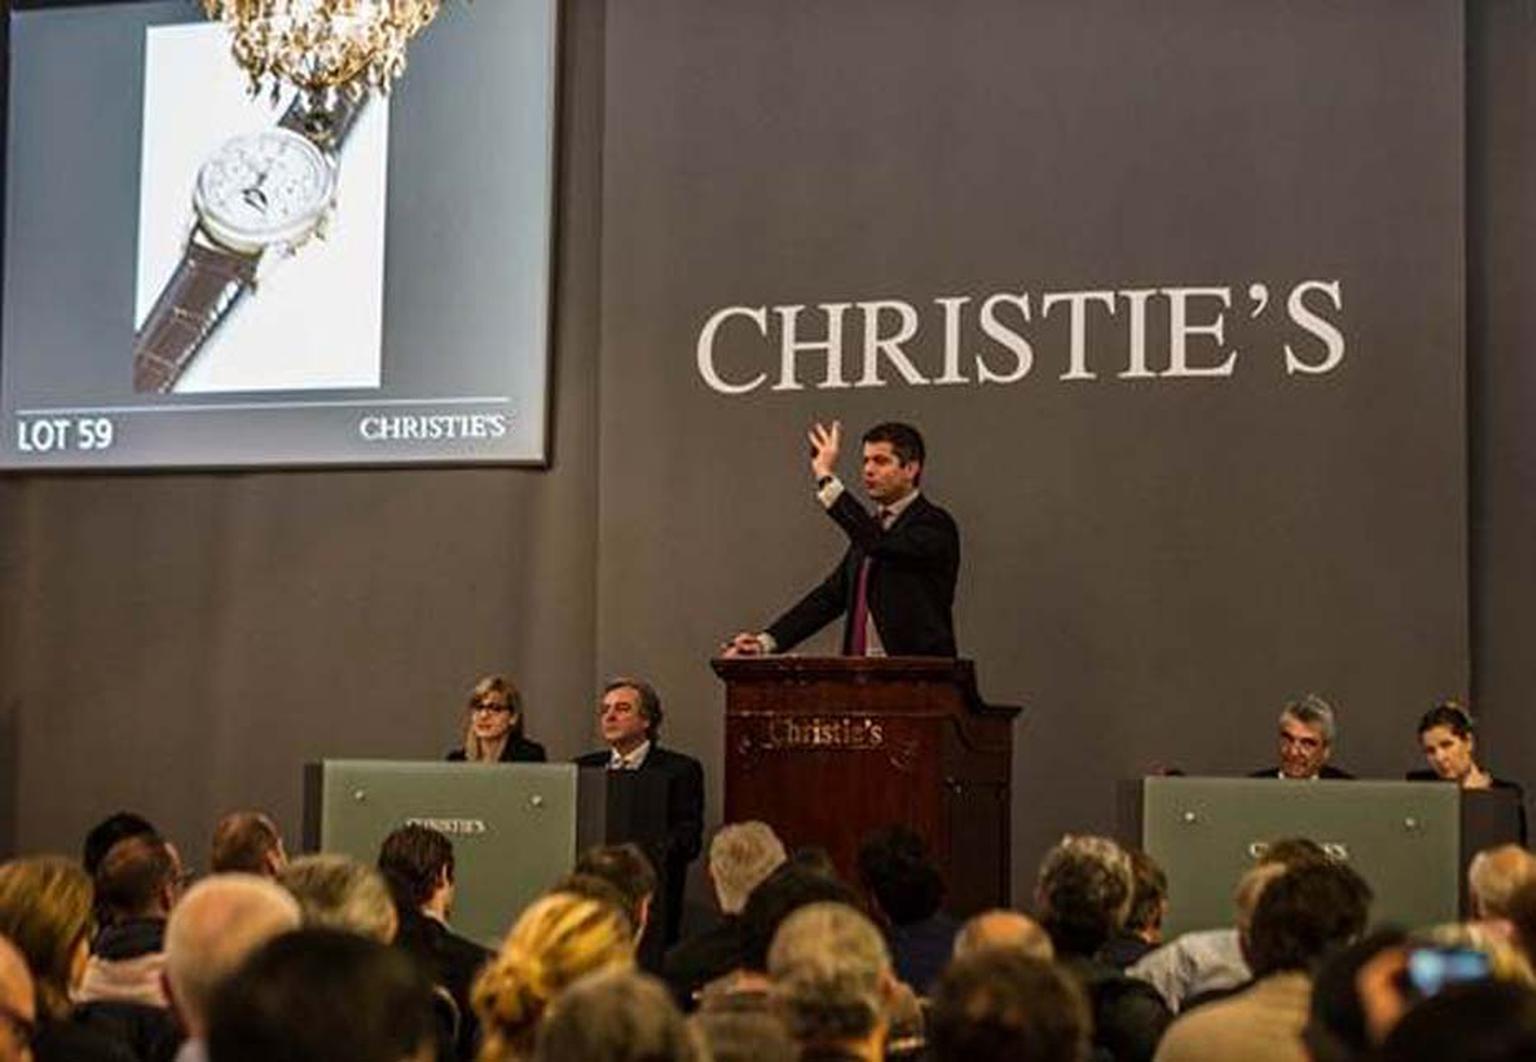 Coinciding with Patek Philippe’s grandiose 175th anniversary, the Christie's sale of vintage Patek Philippe watches accrued a whopping $19.7 million and sold over two thirds of the lots above estimate.